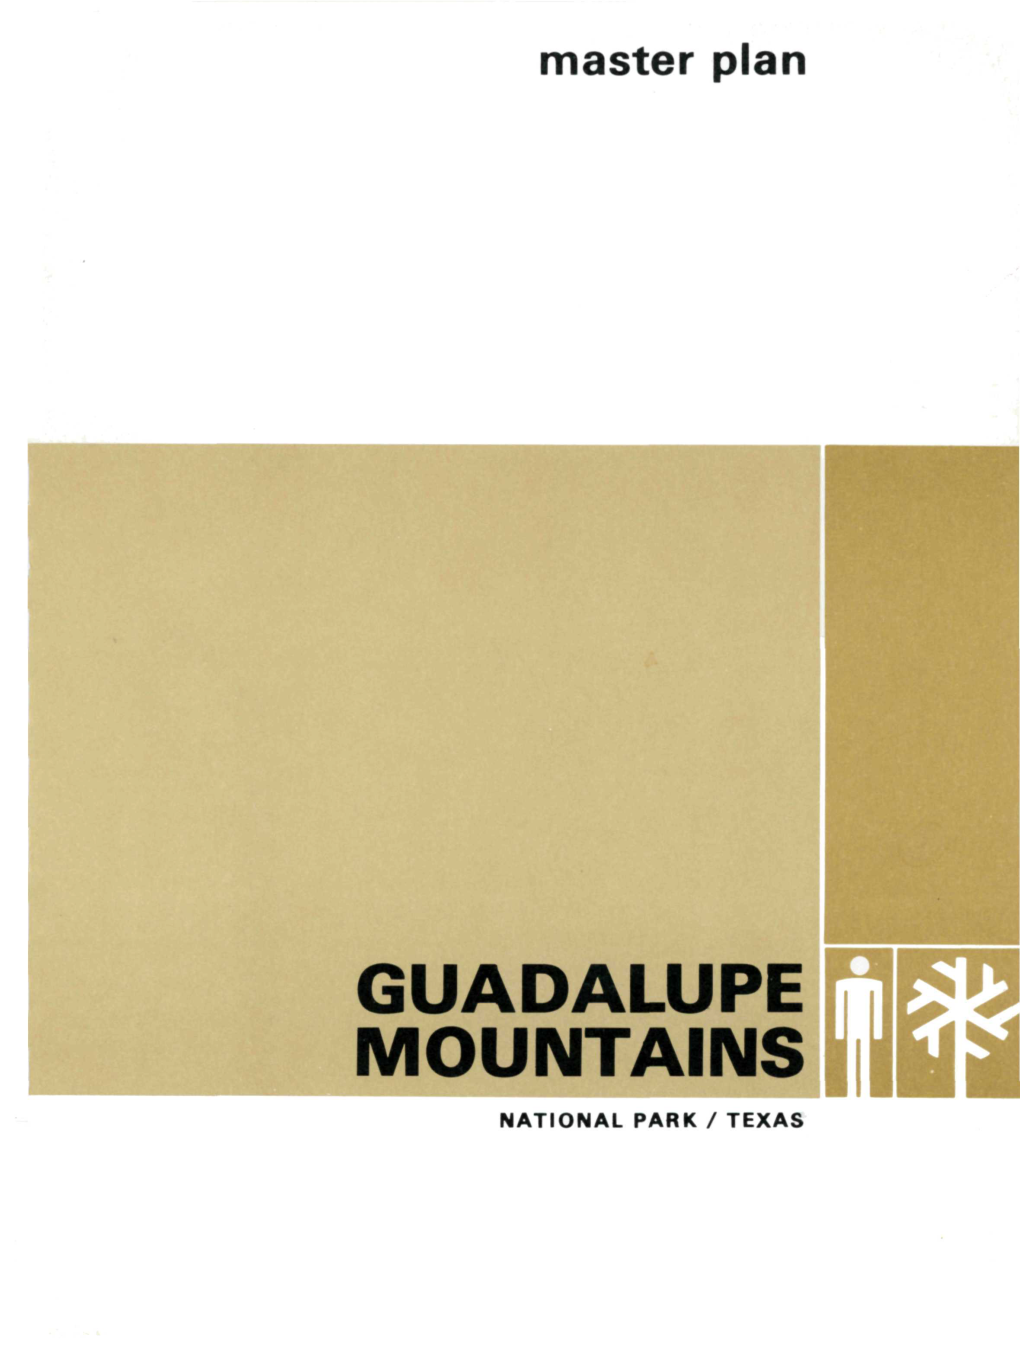 Guadalupe Mountains National Park / Texas Recommended